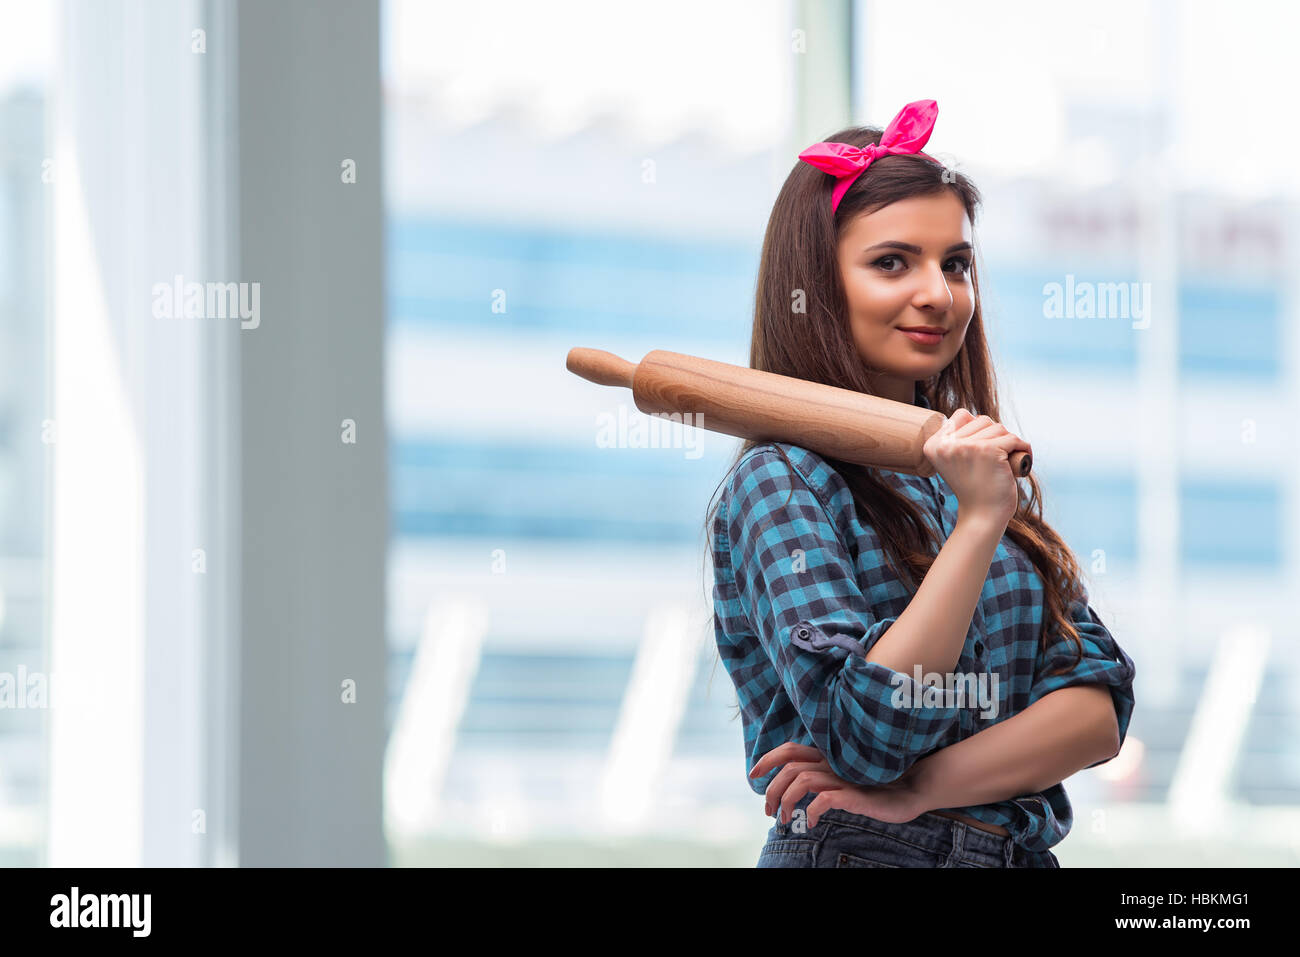 Woman with rolling pin in the kitchen Stock Photo